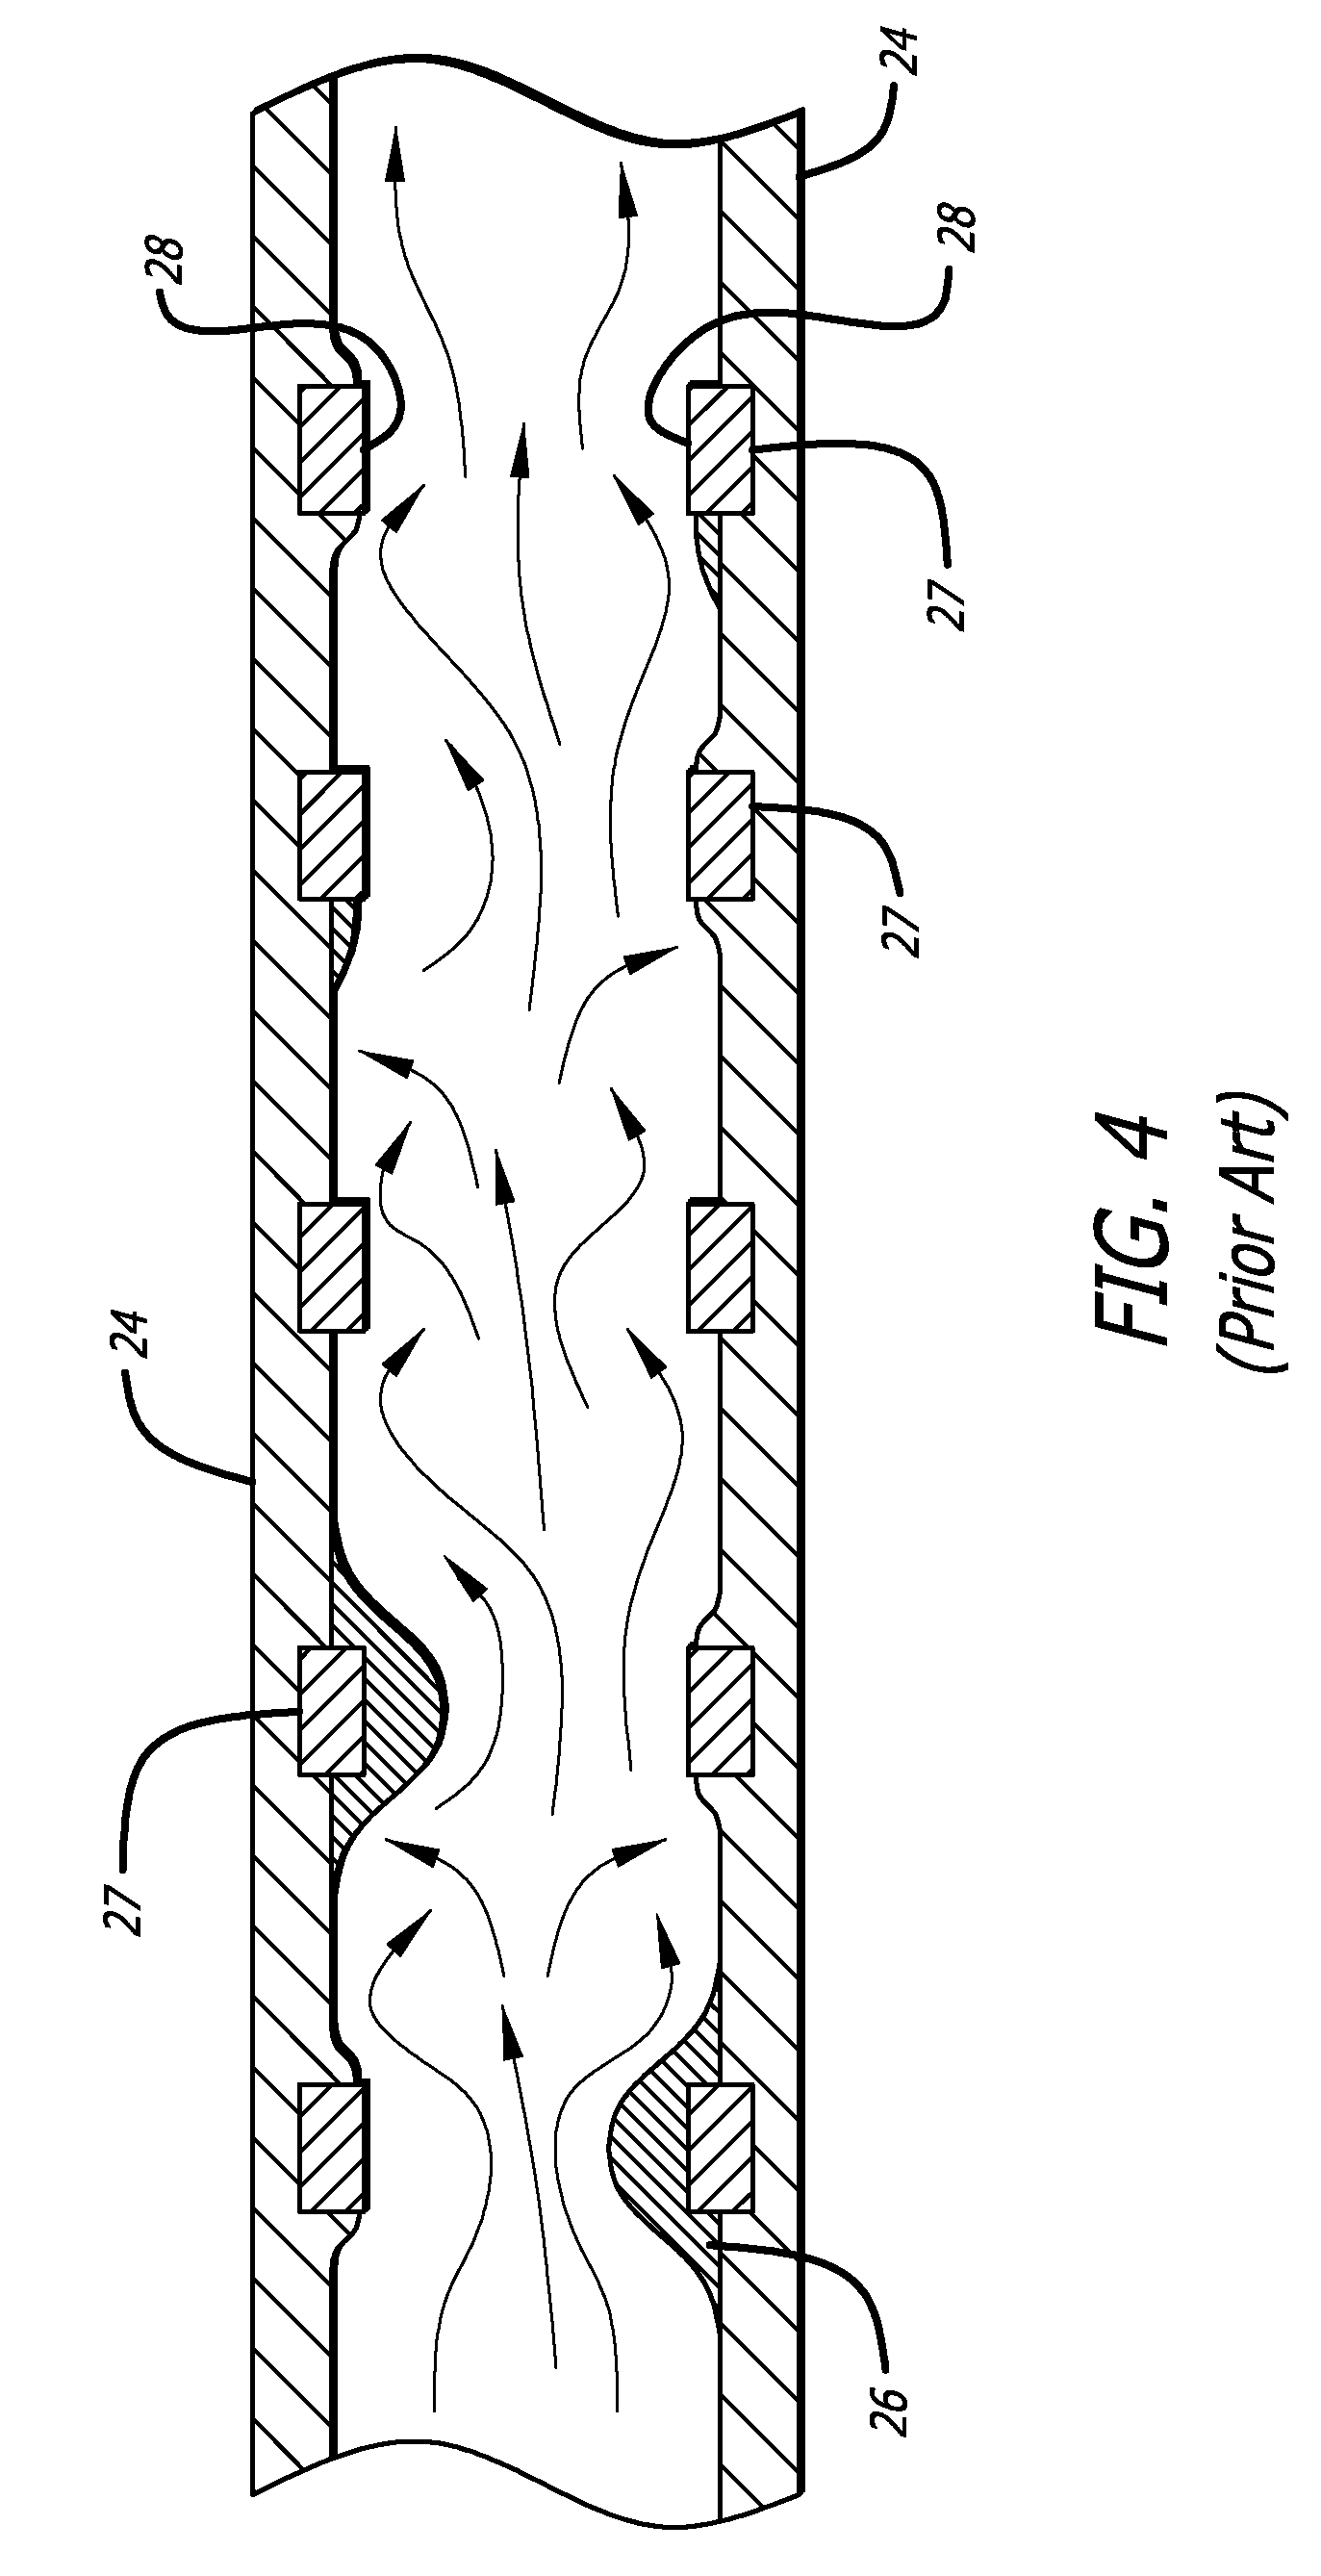 Electrochemical formation of foil-shaped stent struts